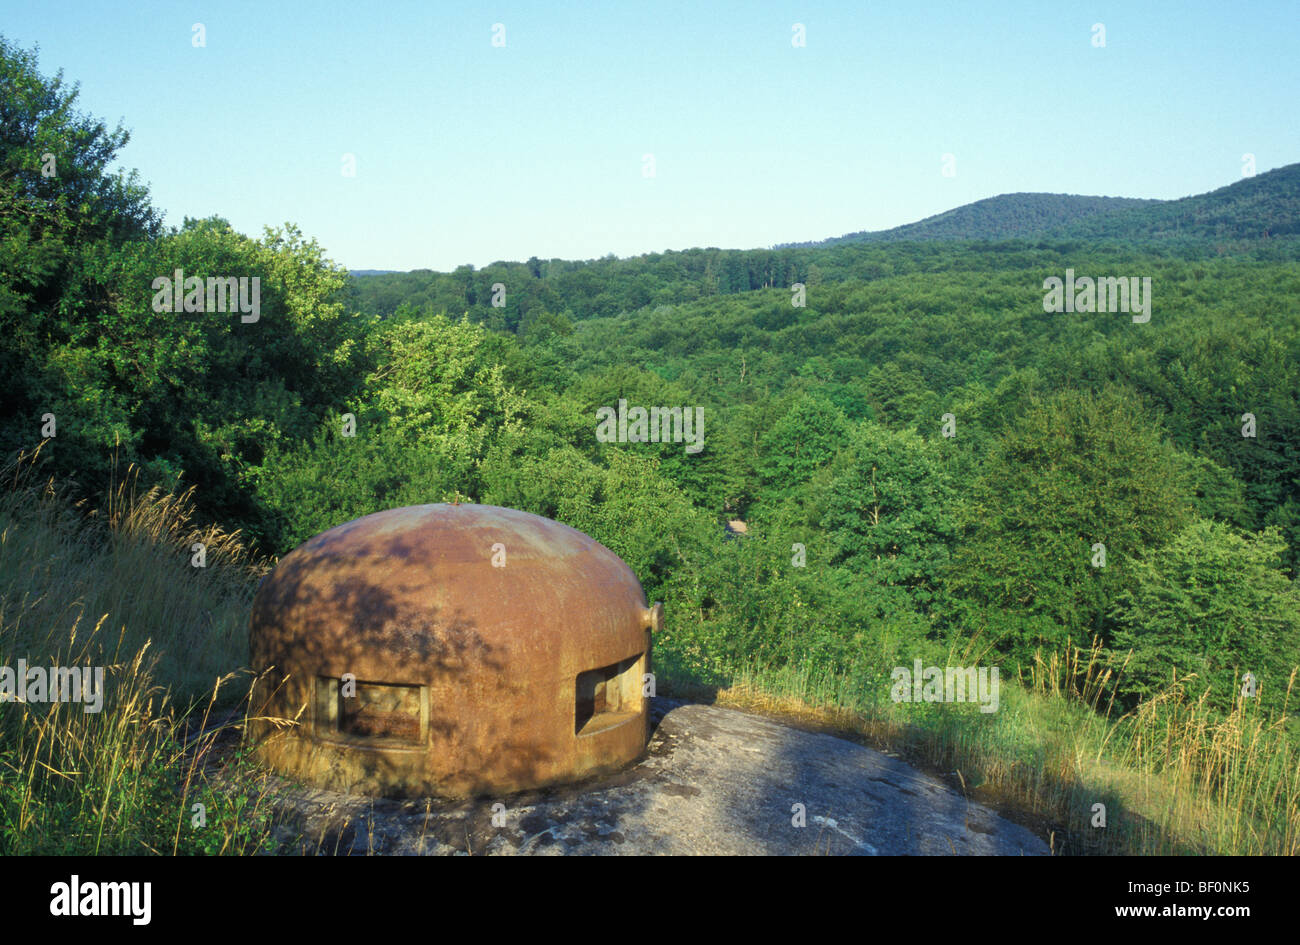 Bunker of Maginot Line near Lembach, Alsace, France Stock Photo